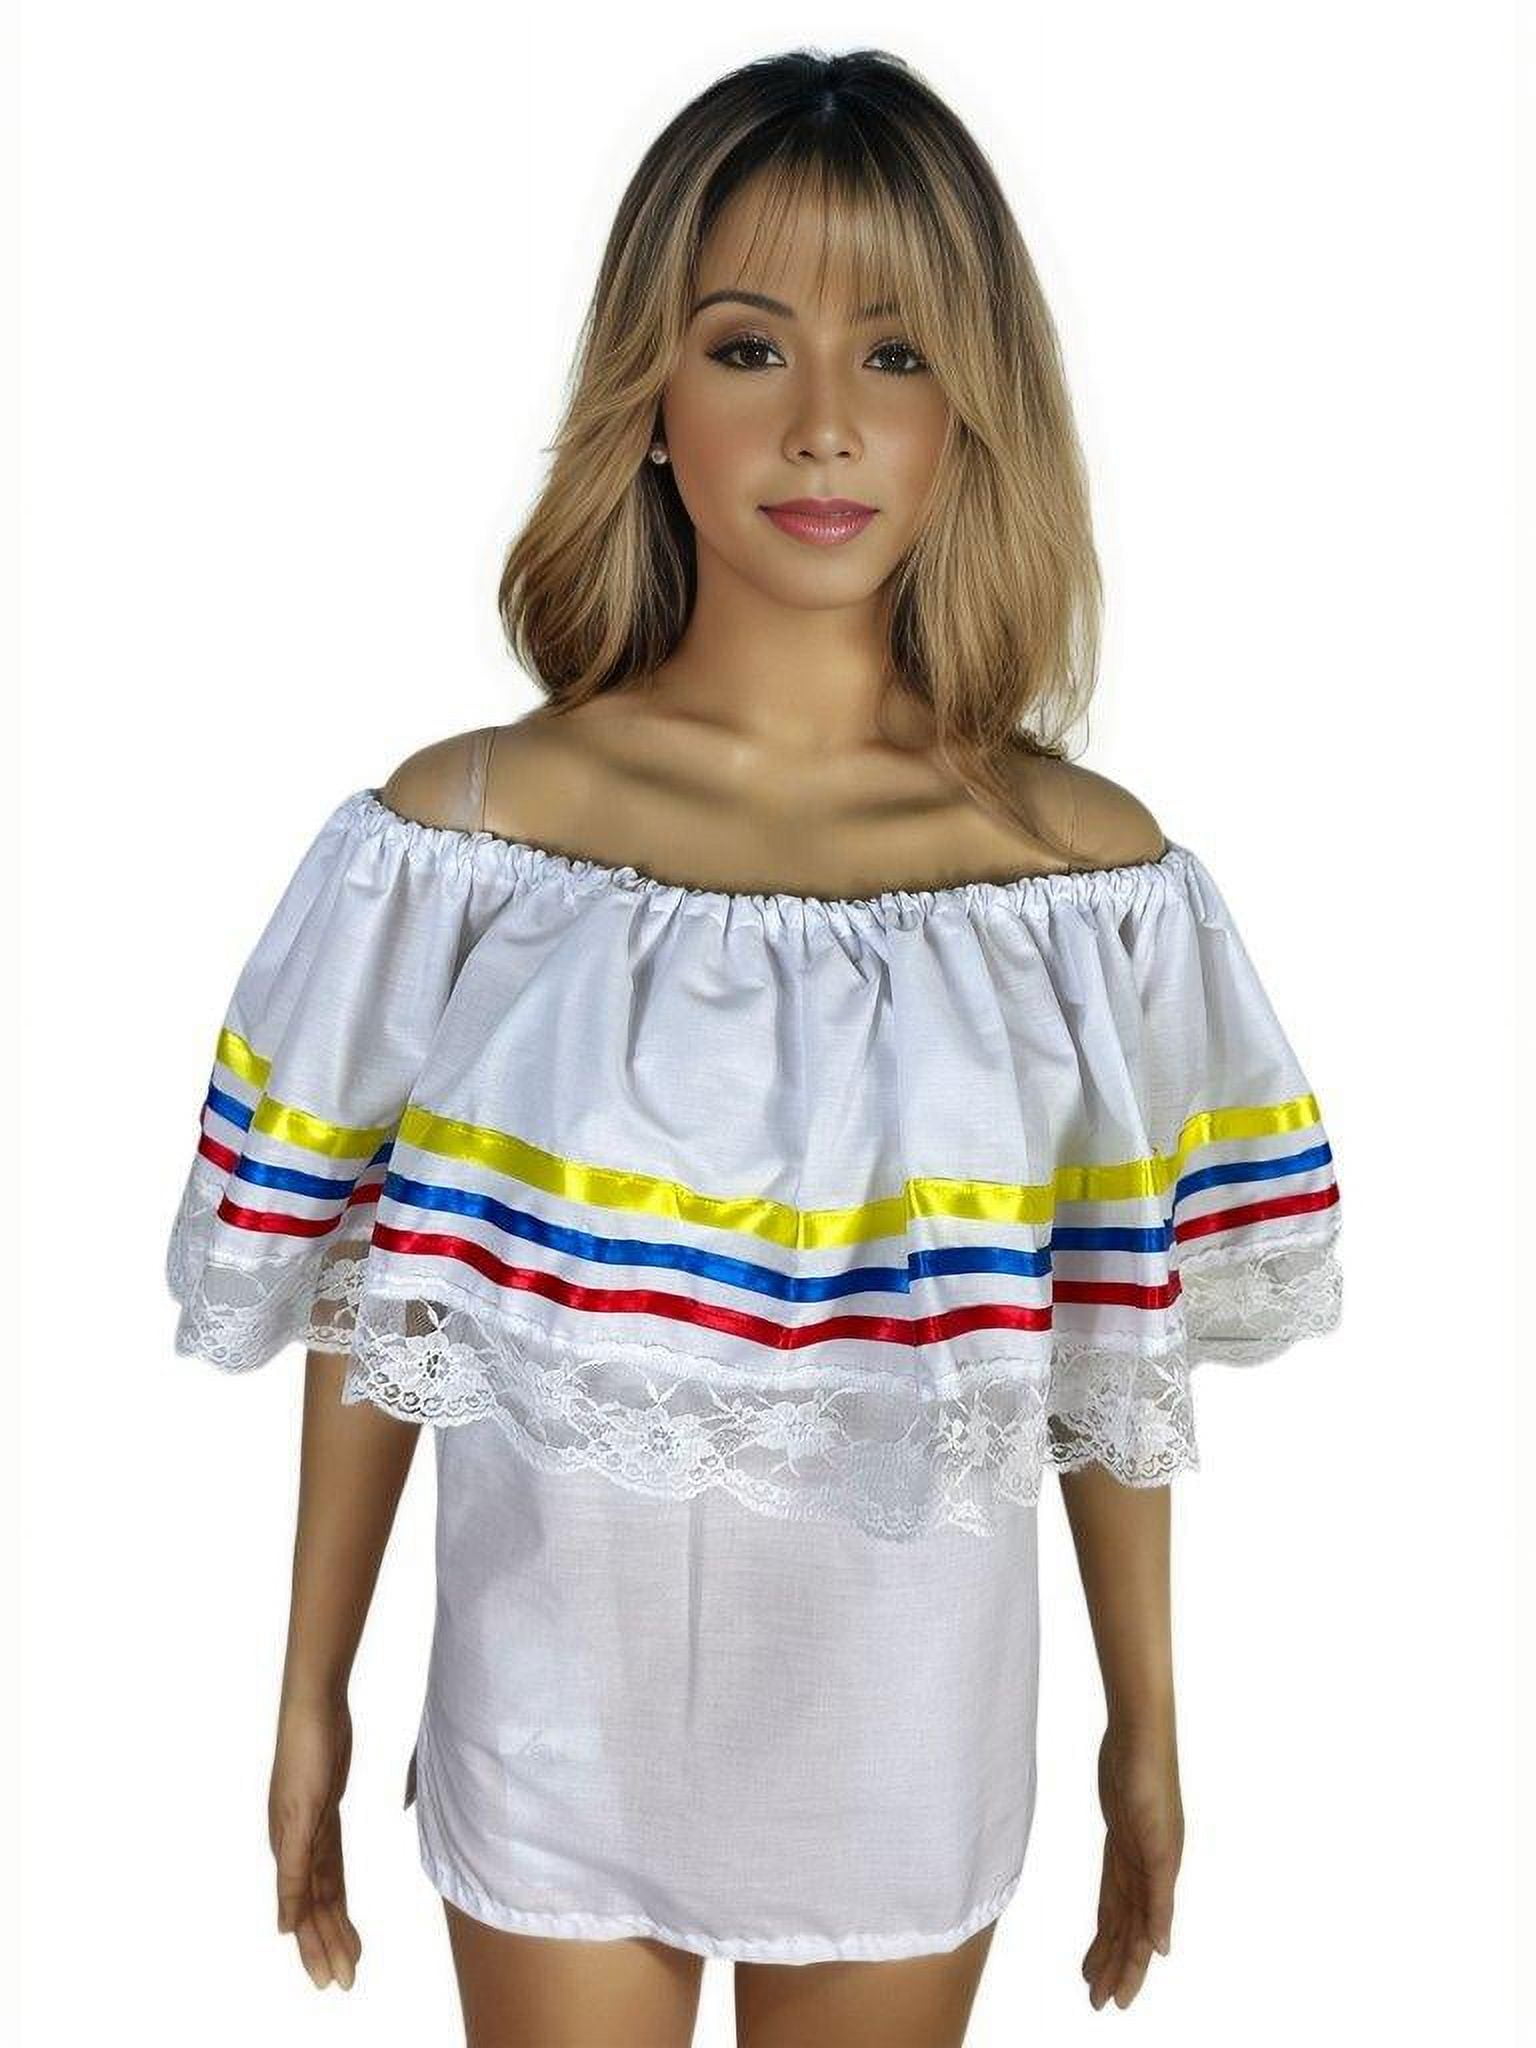 Colombian / Venezuelan White Blouse with Ribbons 